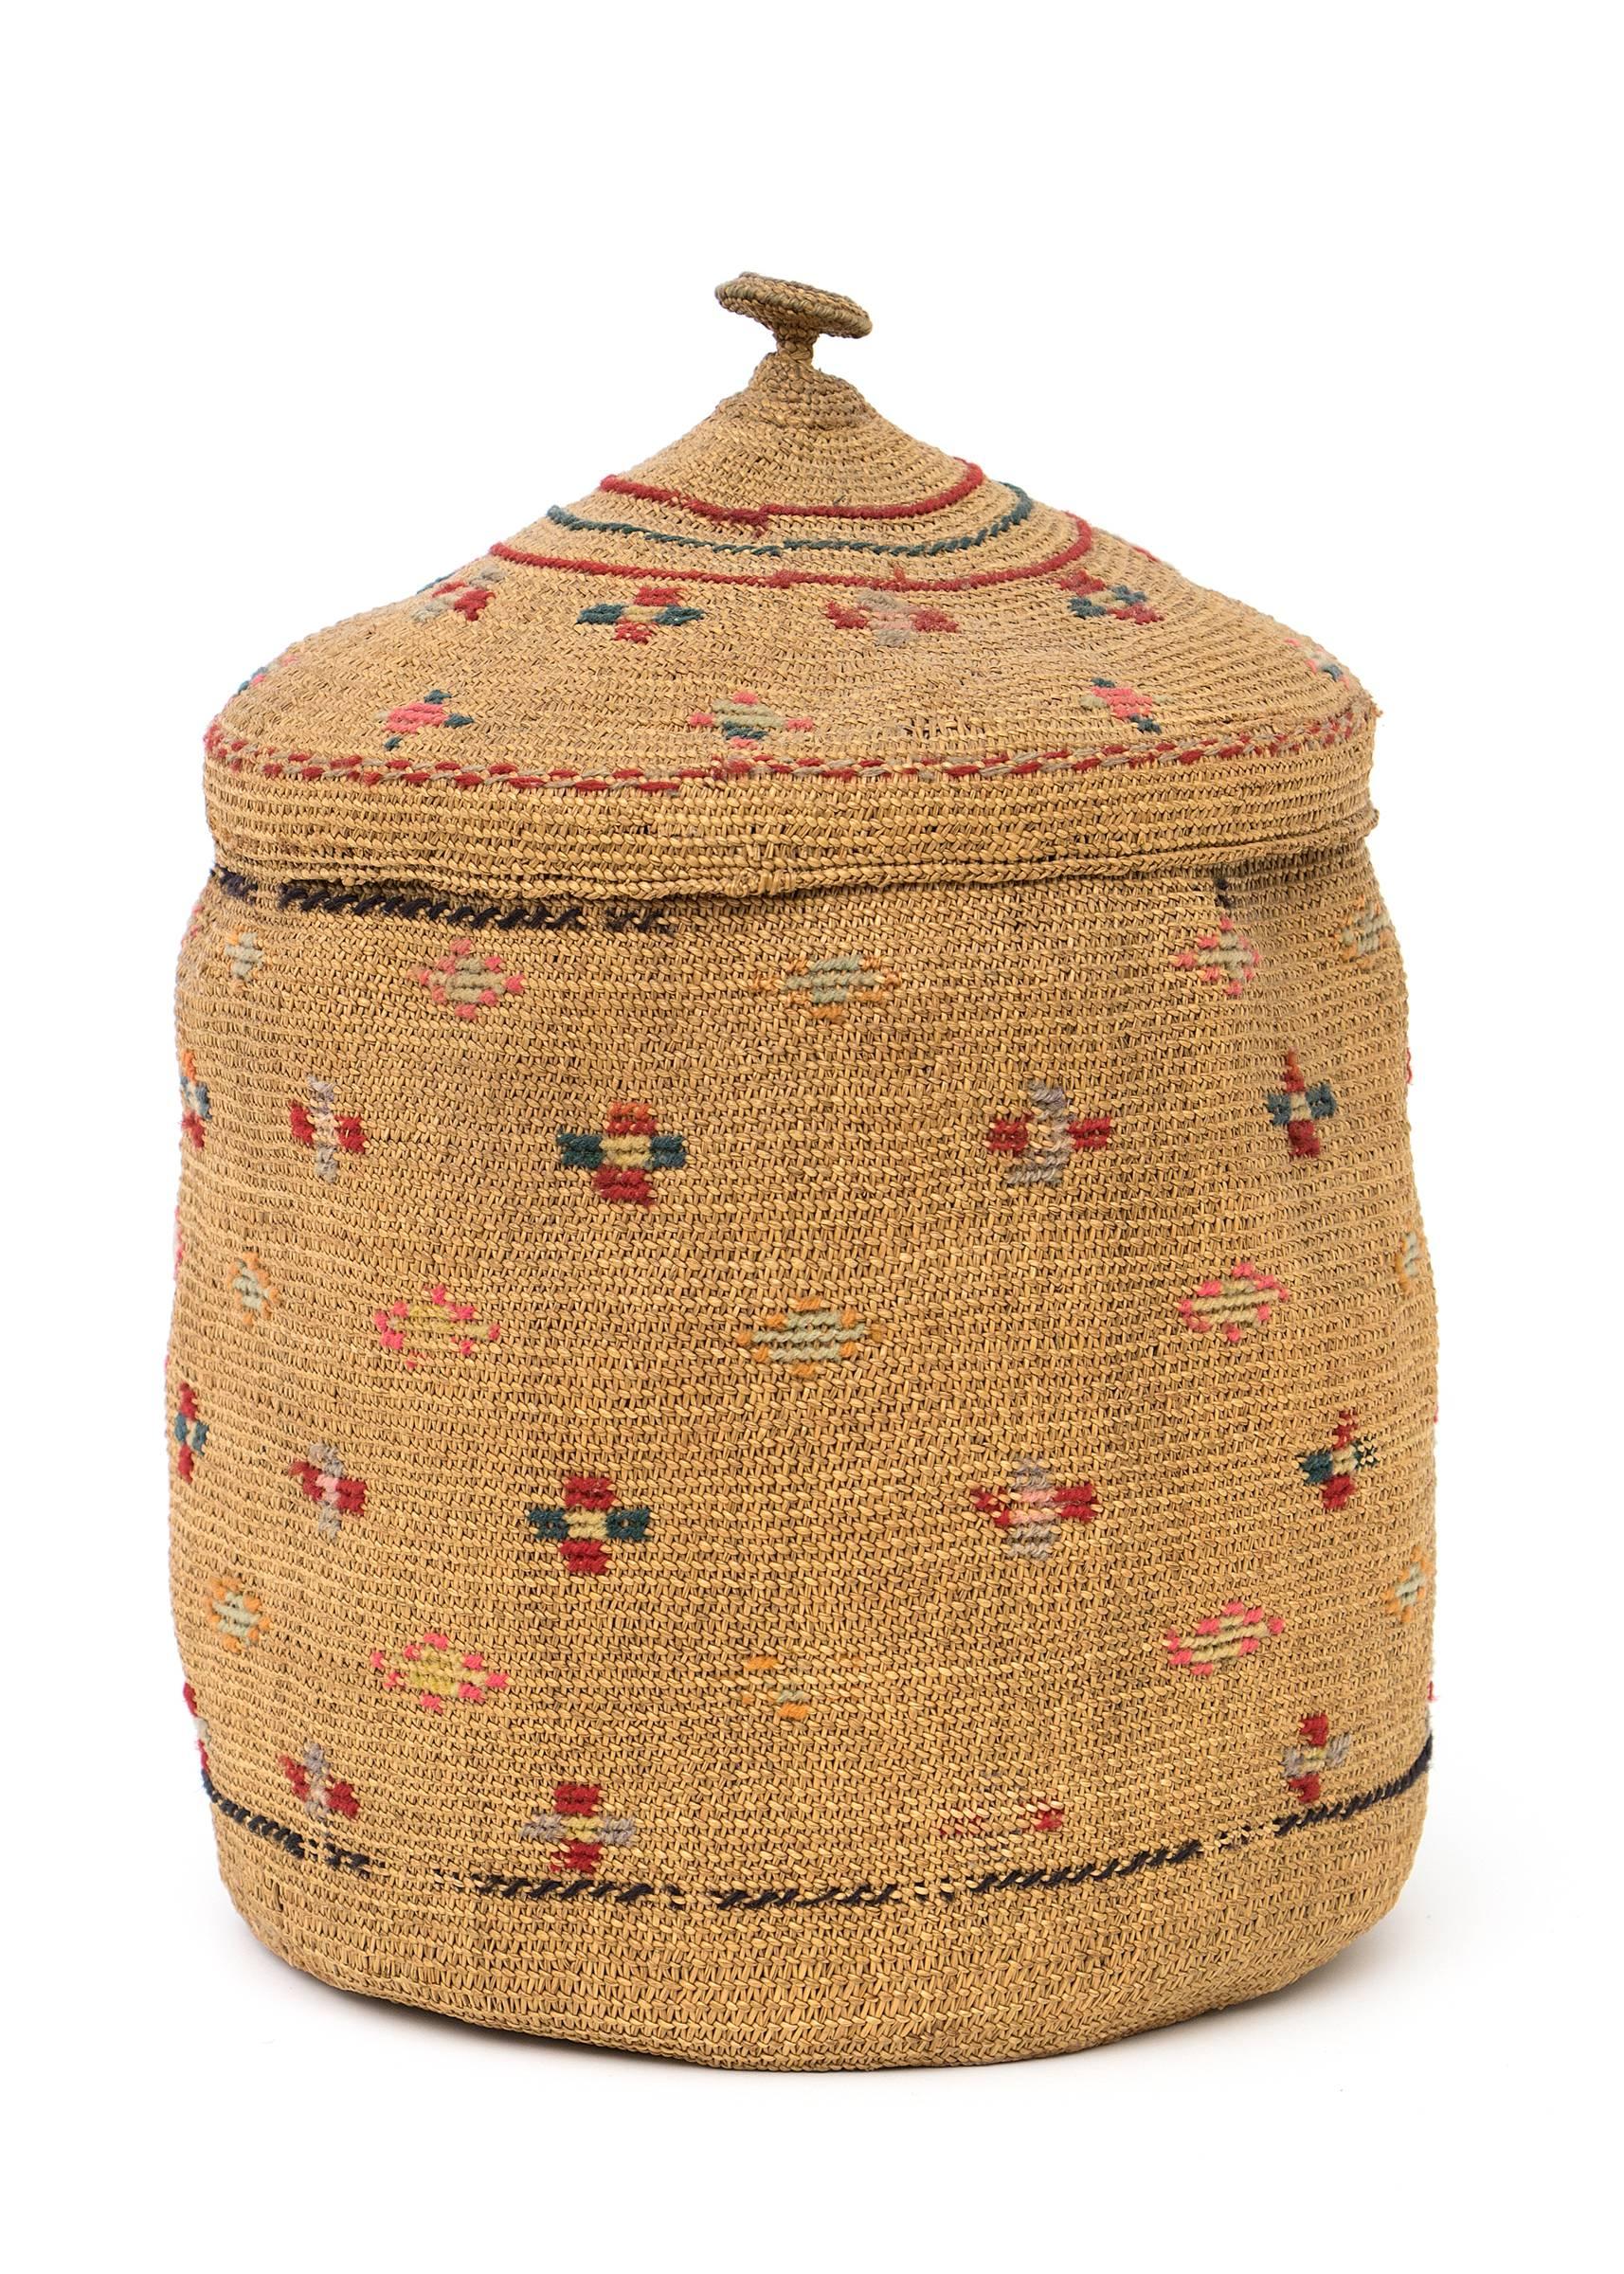 A lidded basket very finely woven of native grasses incorporating geometric designs including crosses of red, gray, green and yellow yarns.

The Tlingit peoples are indigenous to the Pacific Northwest Coast; inhabiting southeastern Alaska,